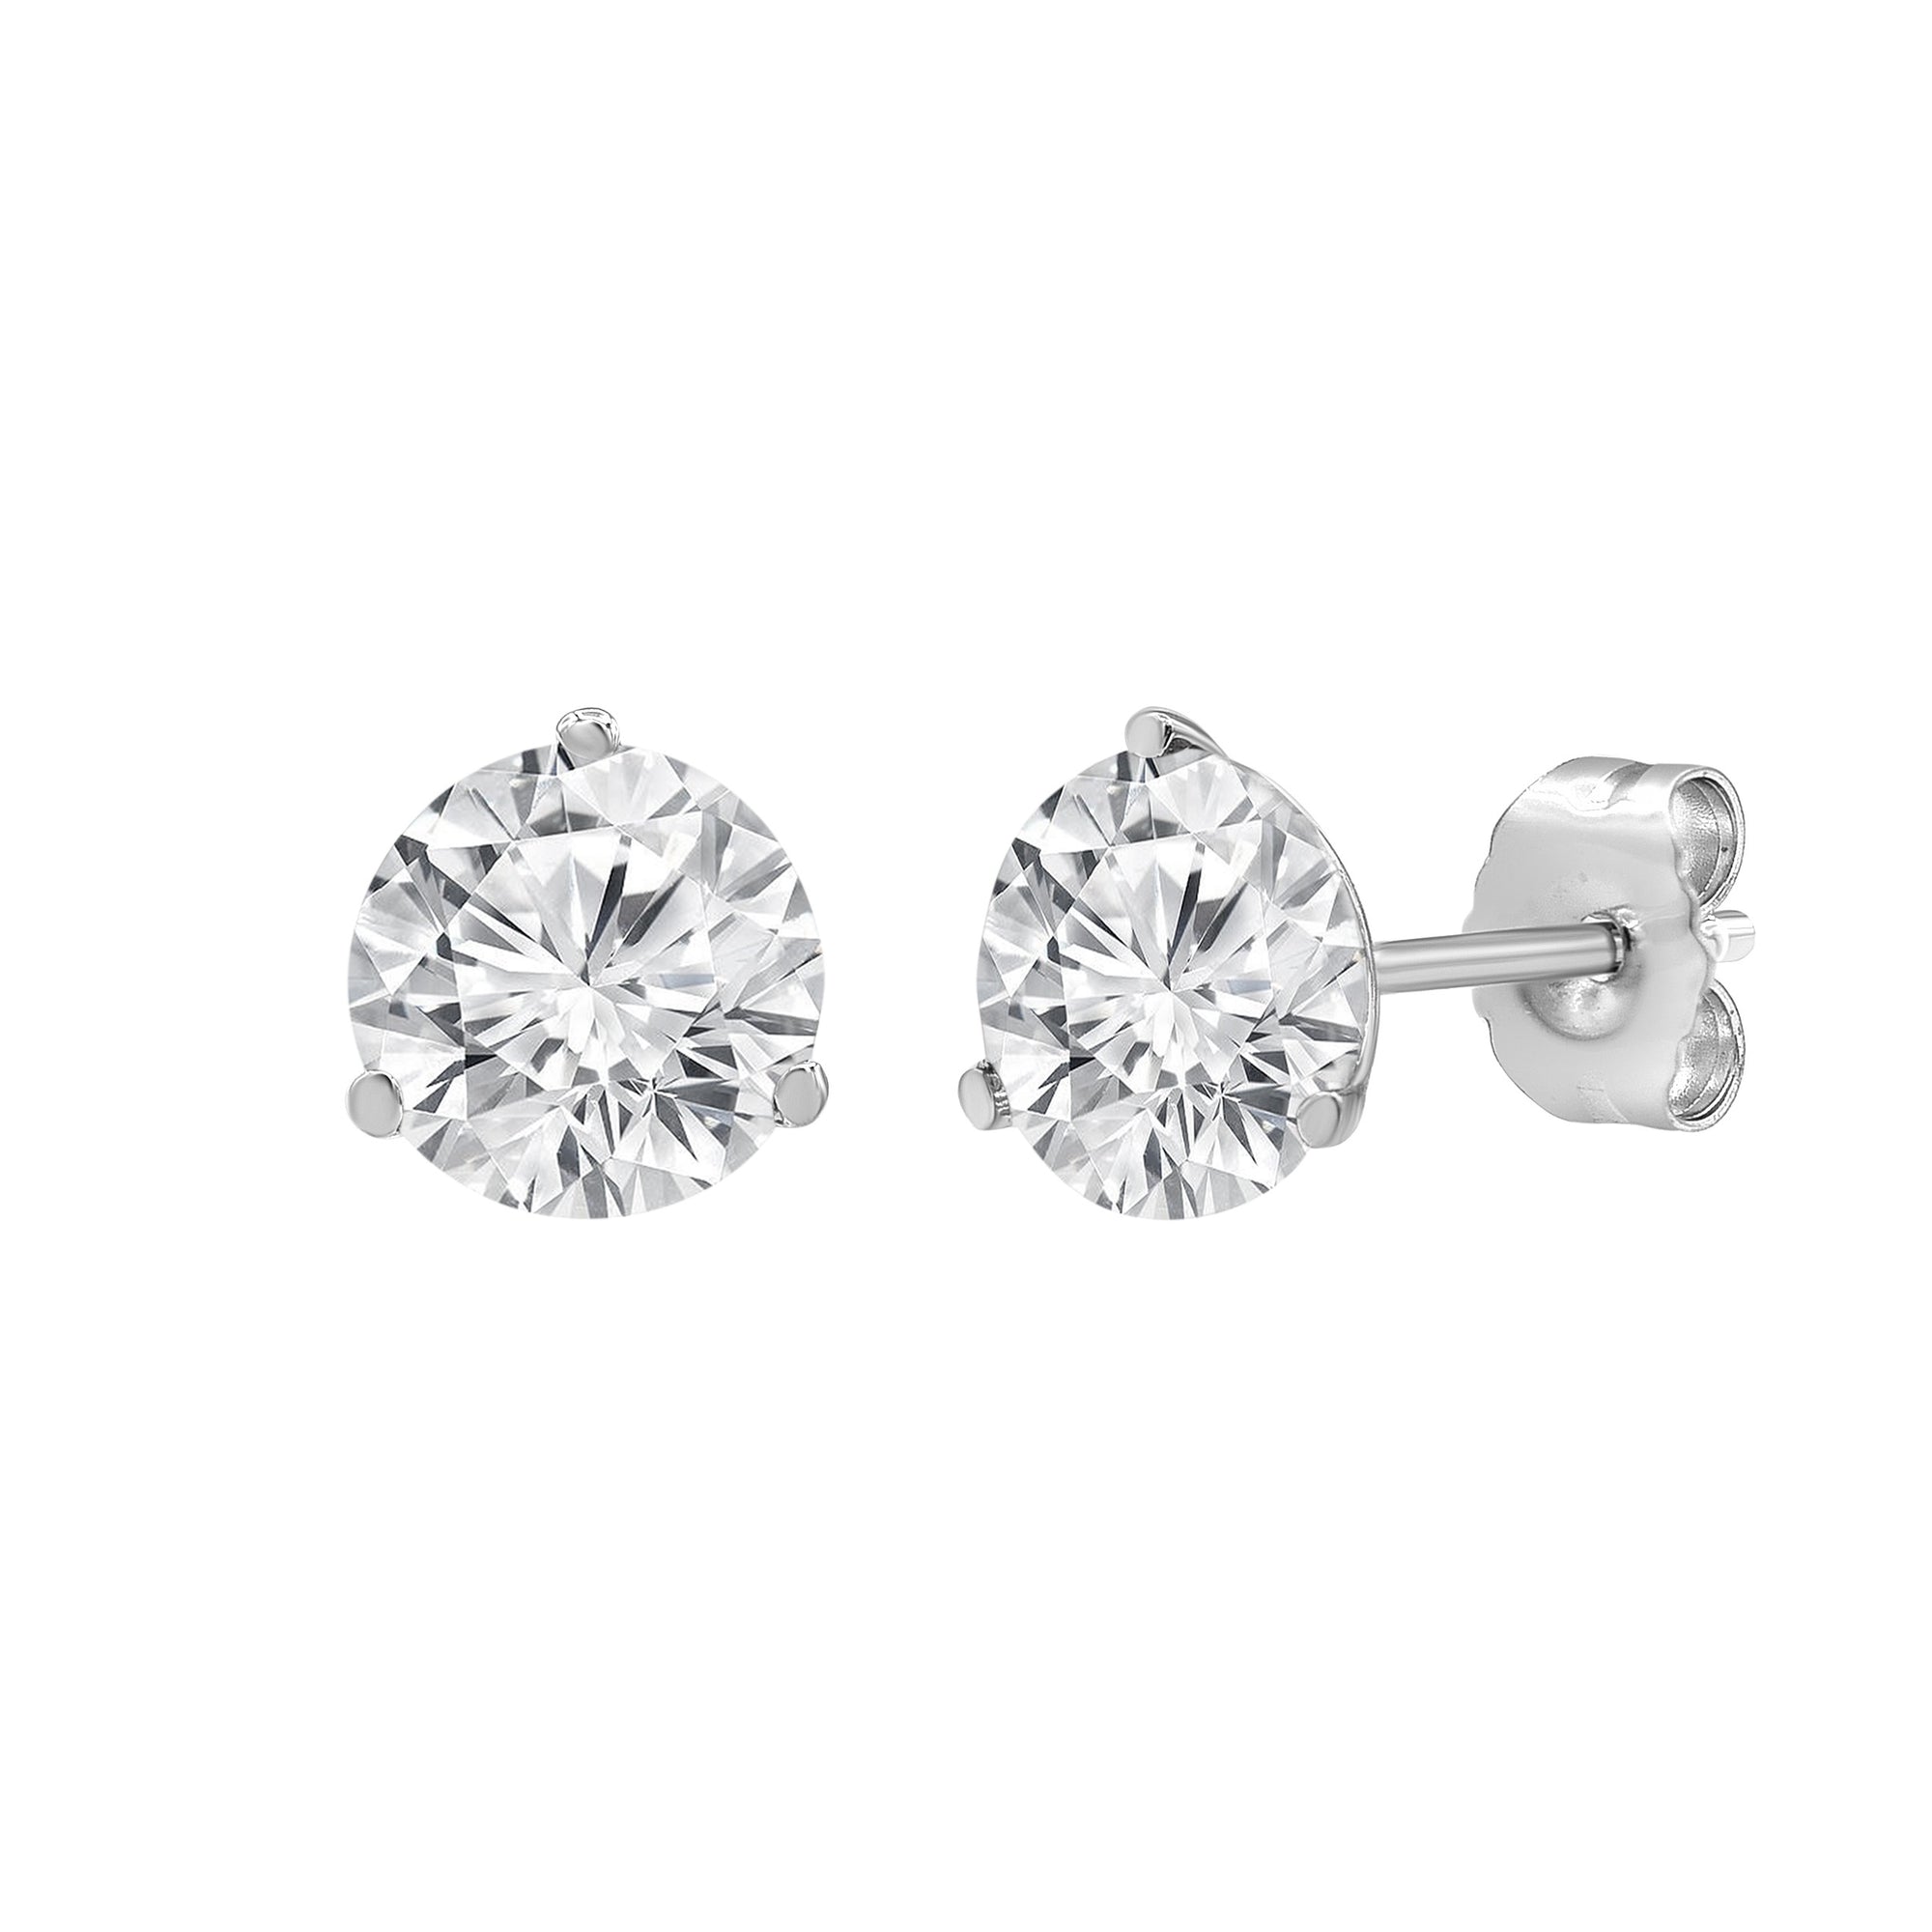 4.00 cttw 3-Prong Martini Studs - Round